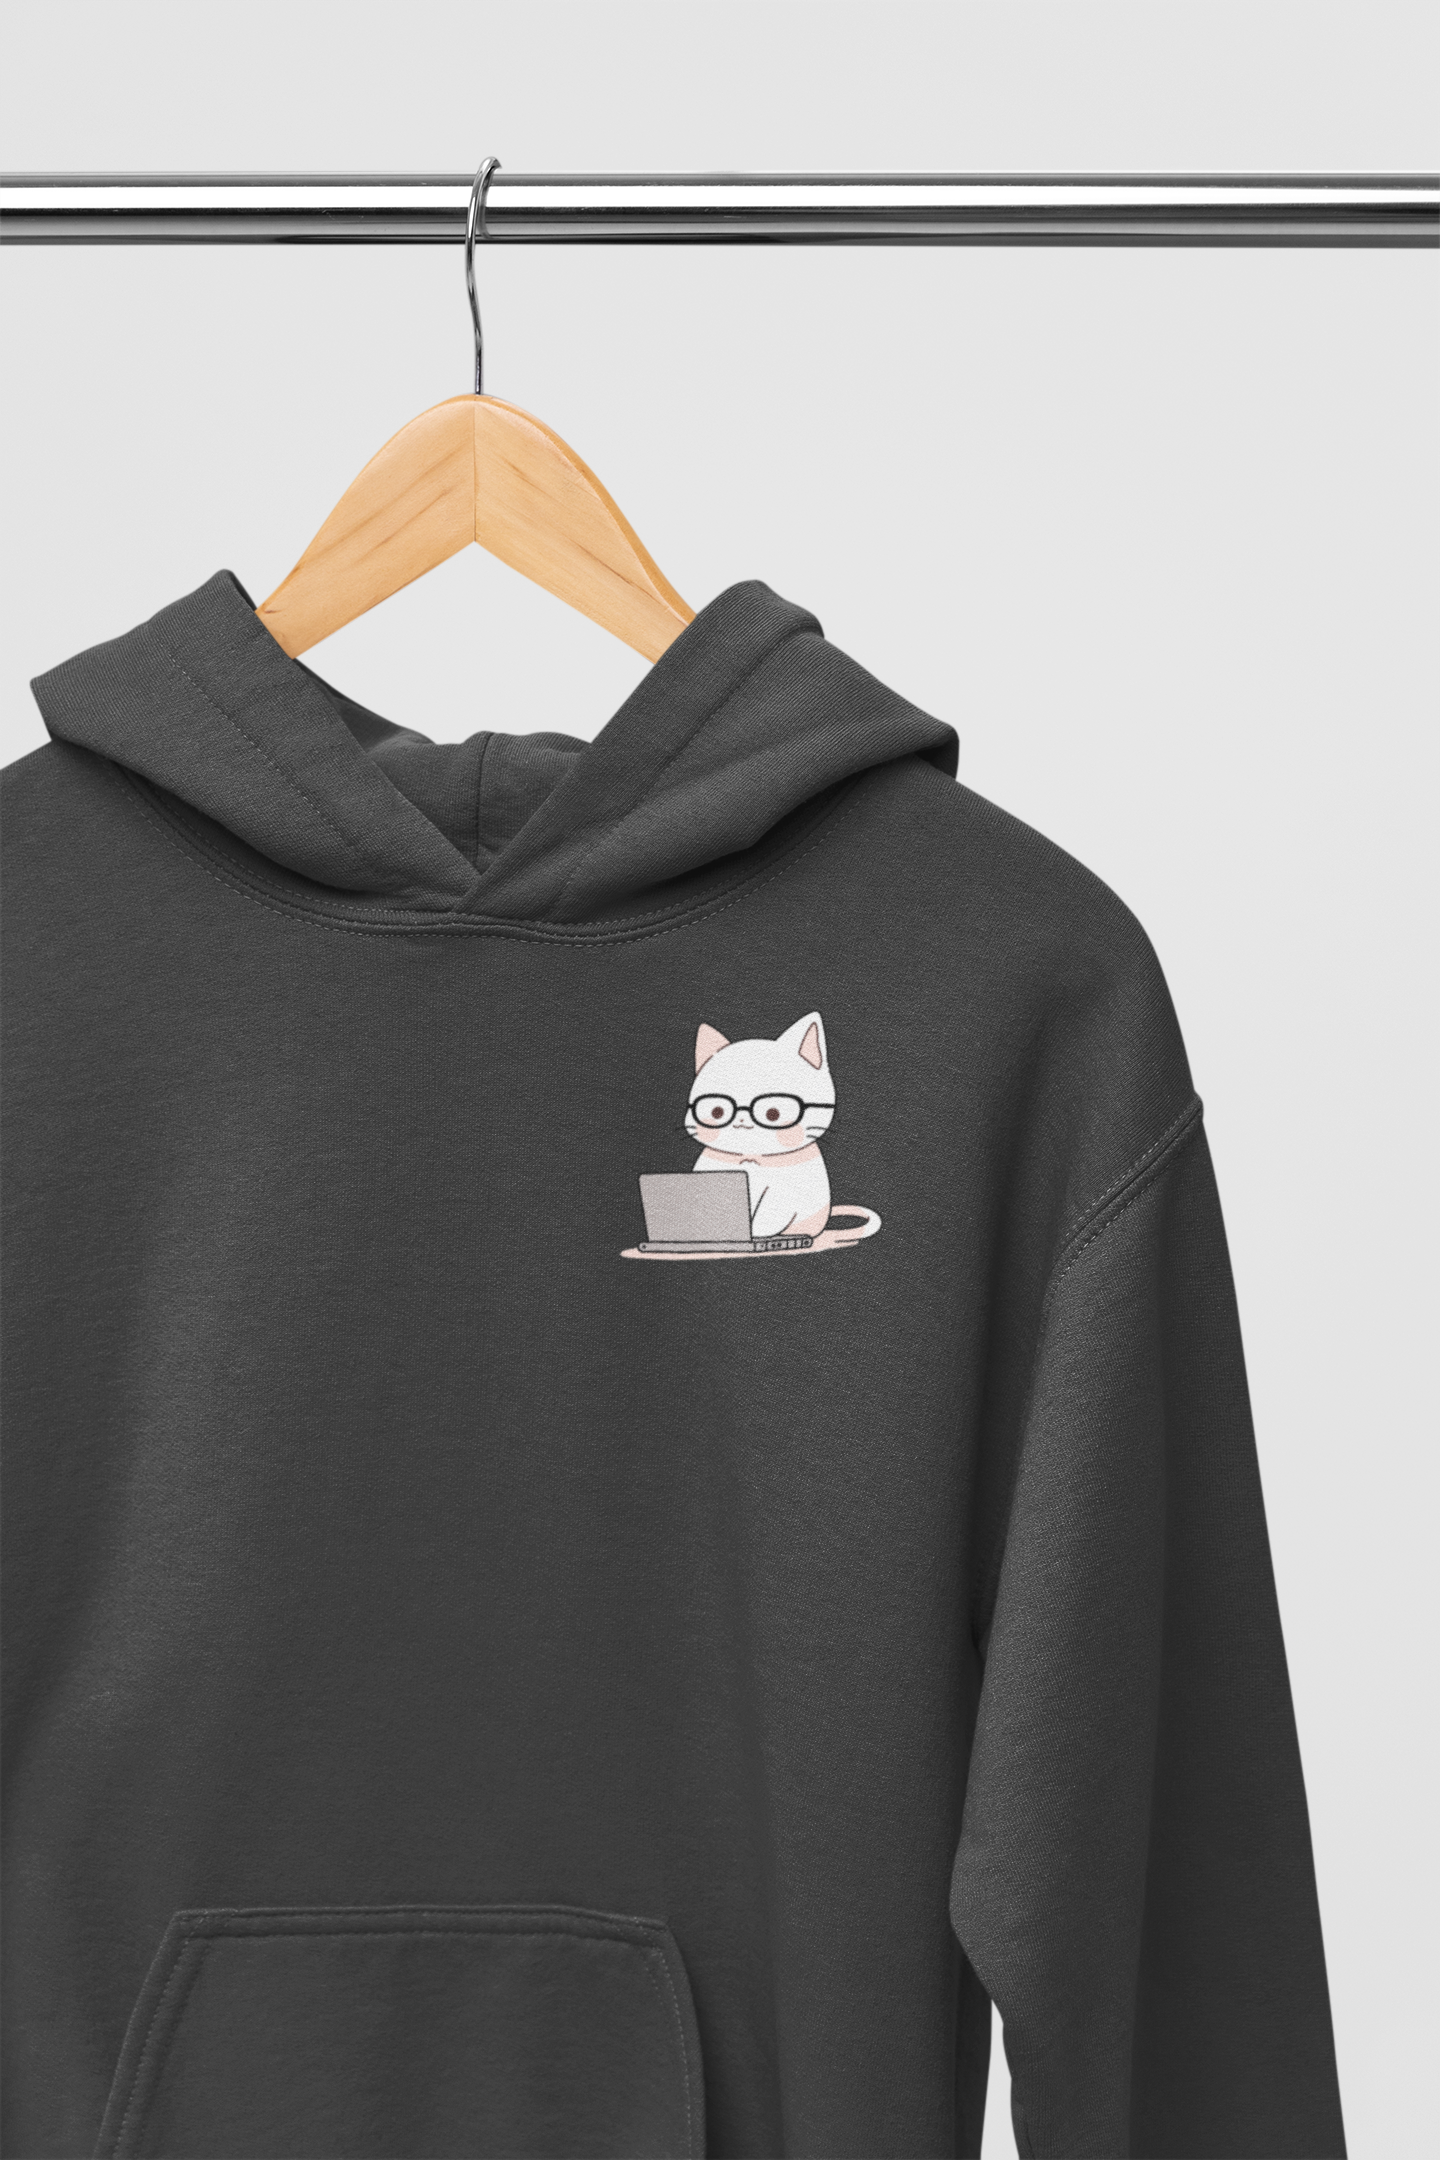 Nerd-Mode Engaged: The Geeky Cat Hoodie